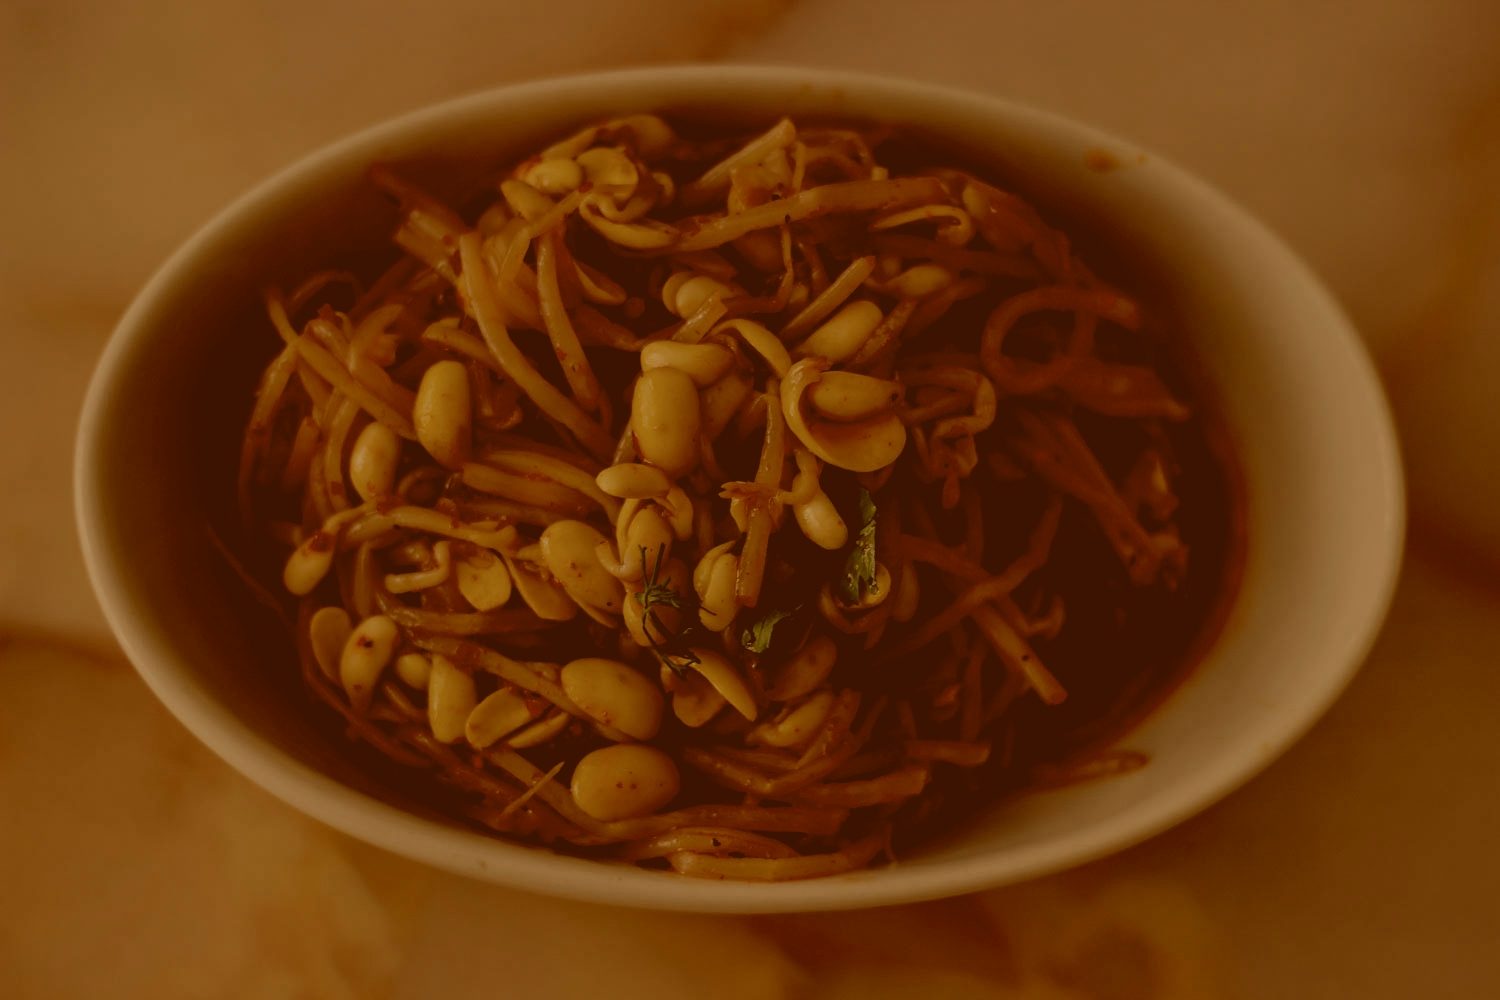 Beansprouts dark